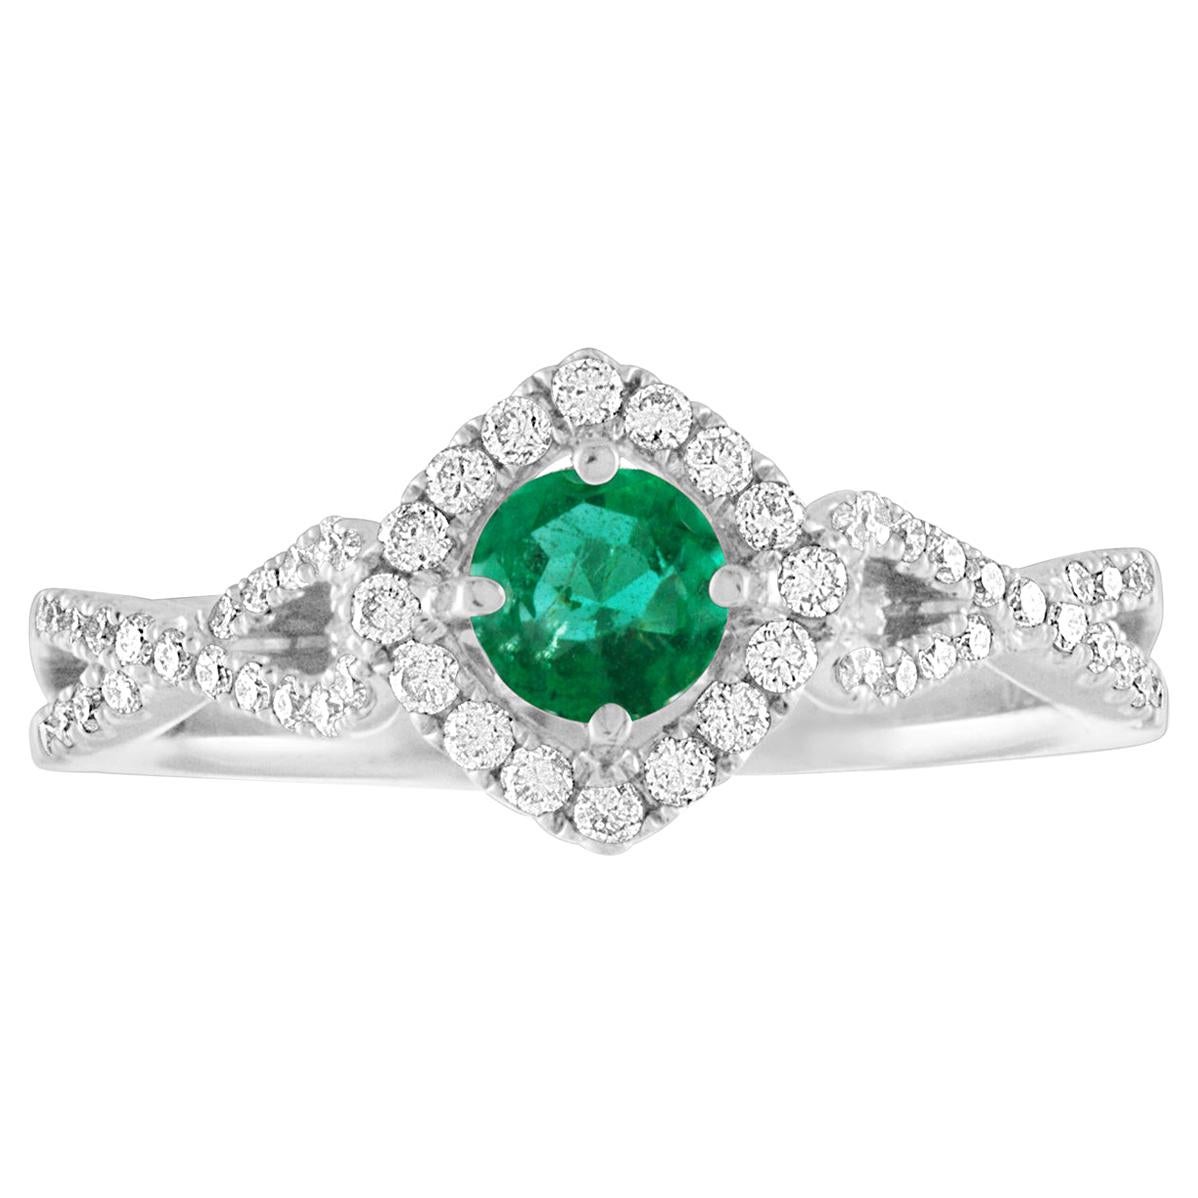 AGL Certified 0.29 Carat Emerald Diamond Gold Ring For Sale